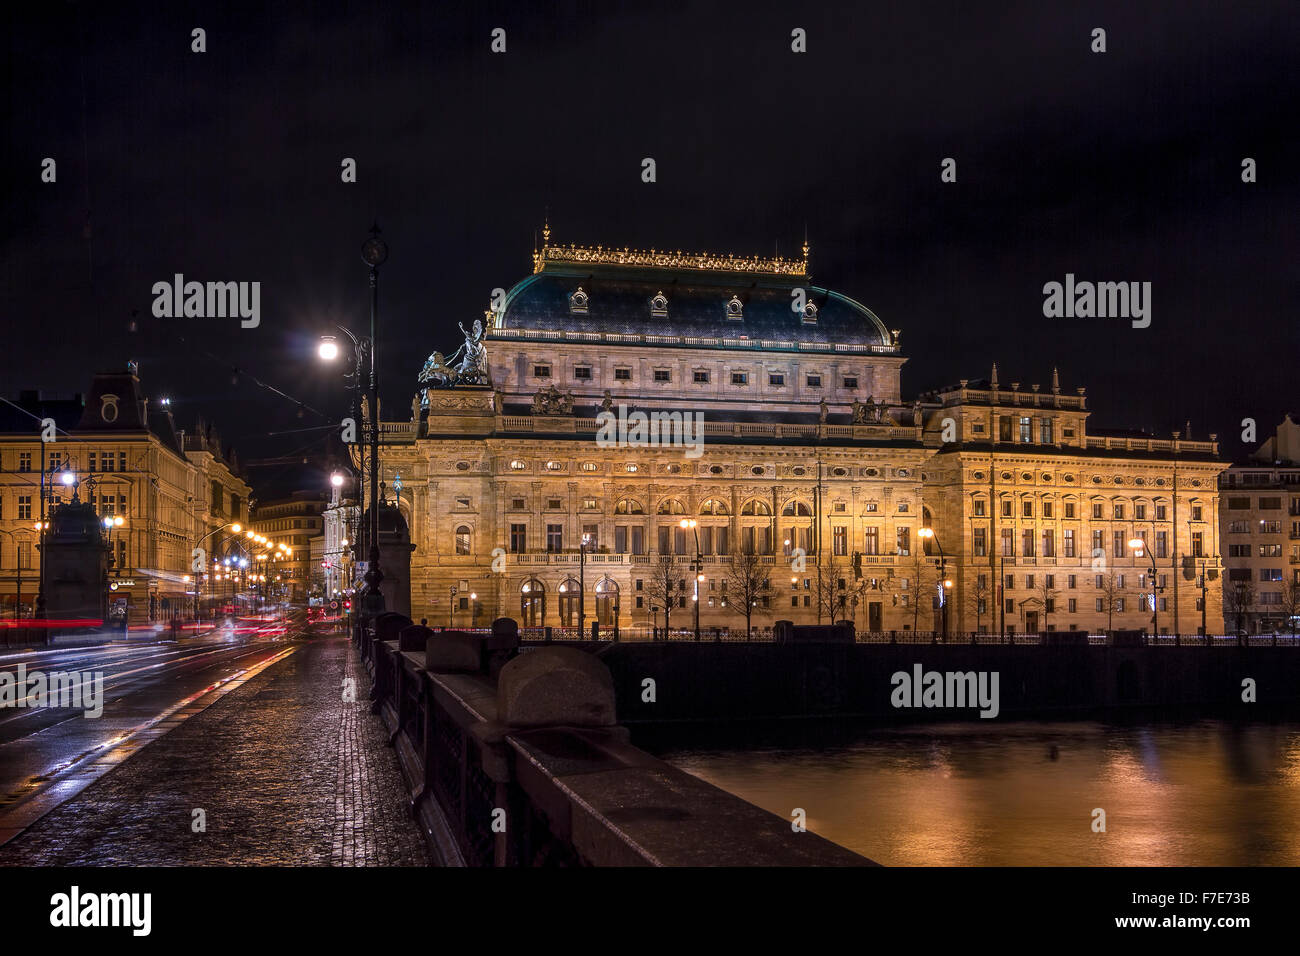 The beautiful National Theater on the banks of the Vltava River in Prague at night. Stock Photo